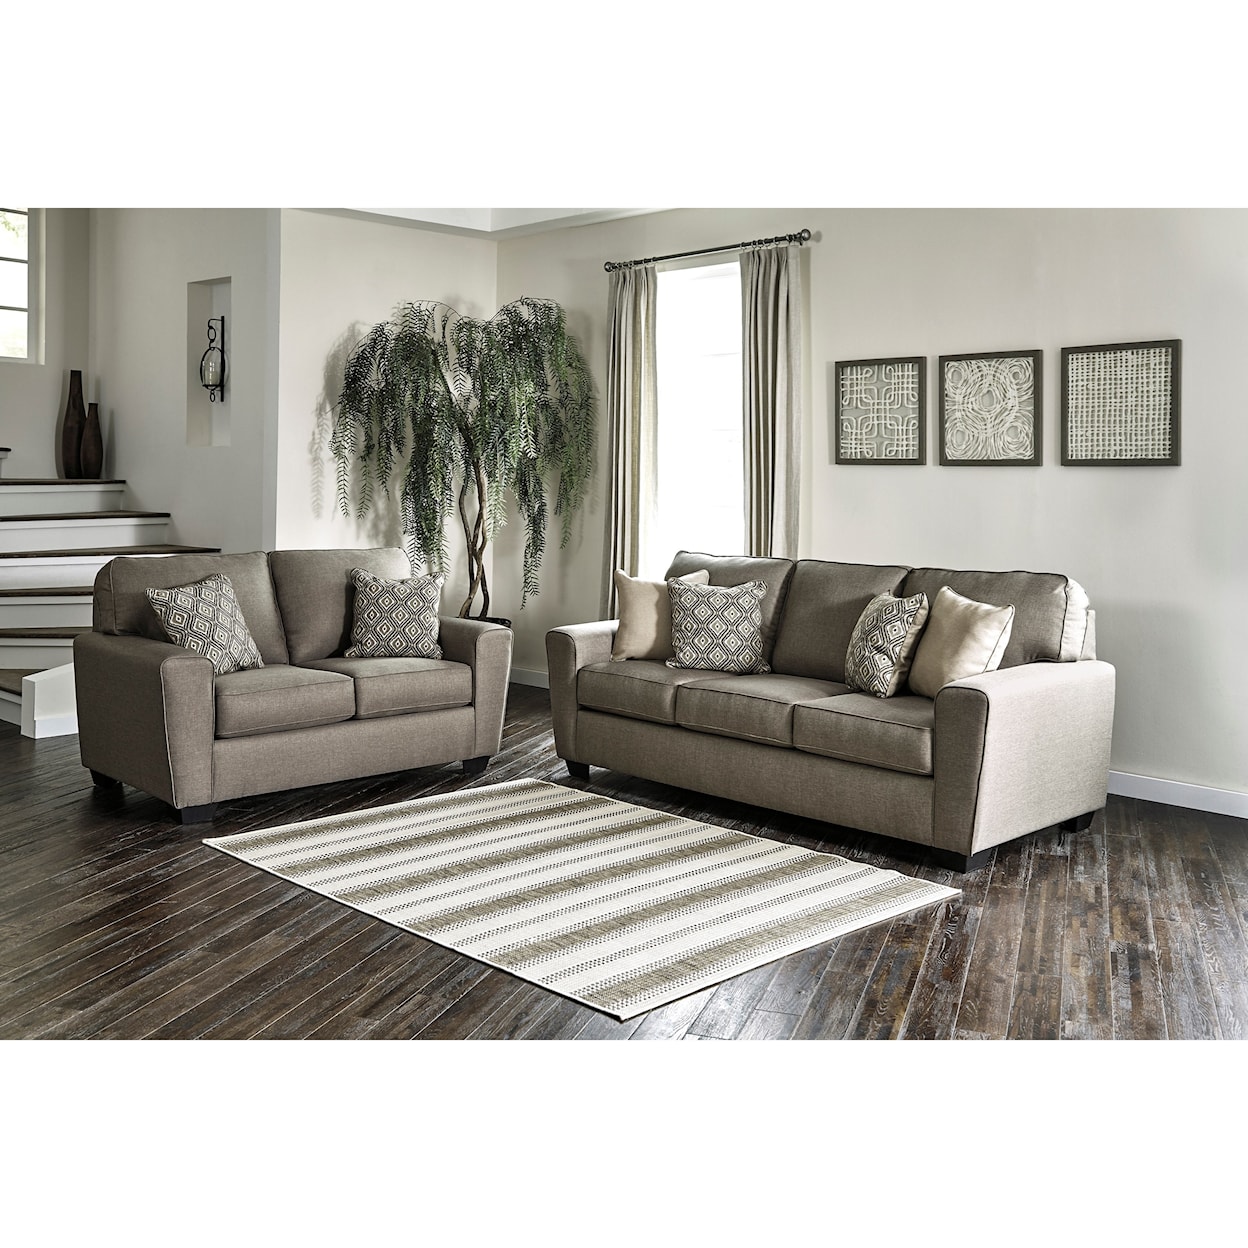 Ashley Furniture Benchcraft Calicho Stationary Living Room Group